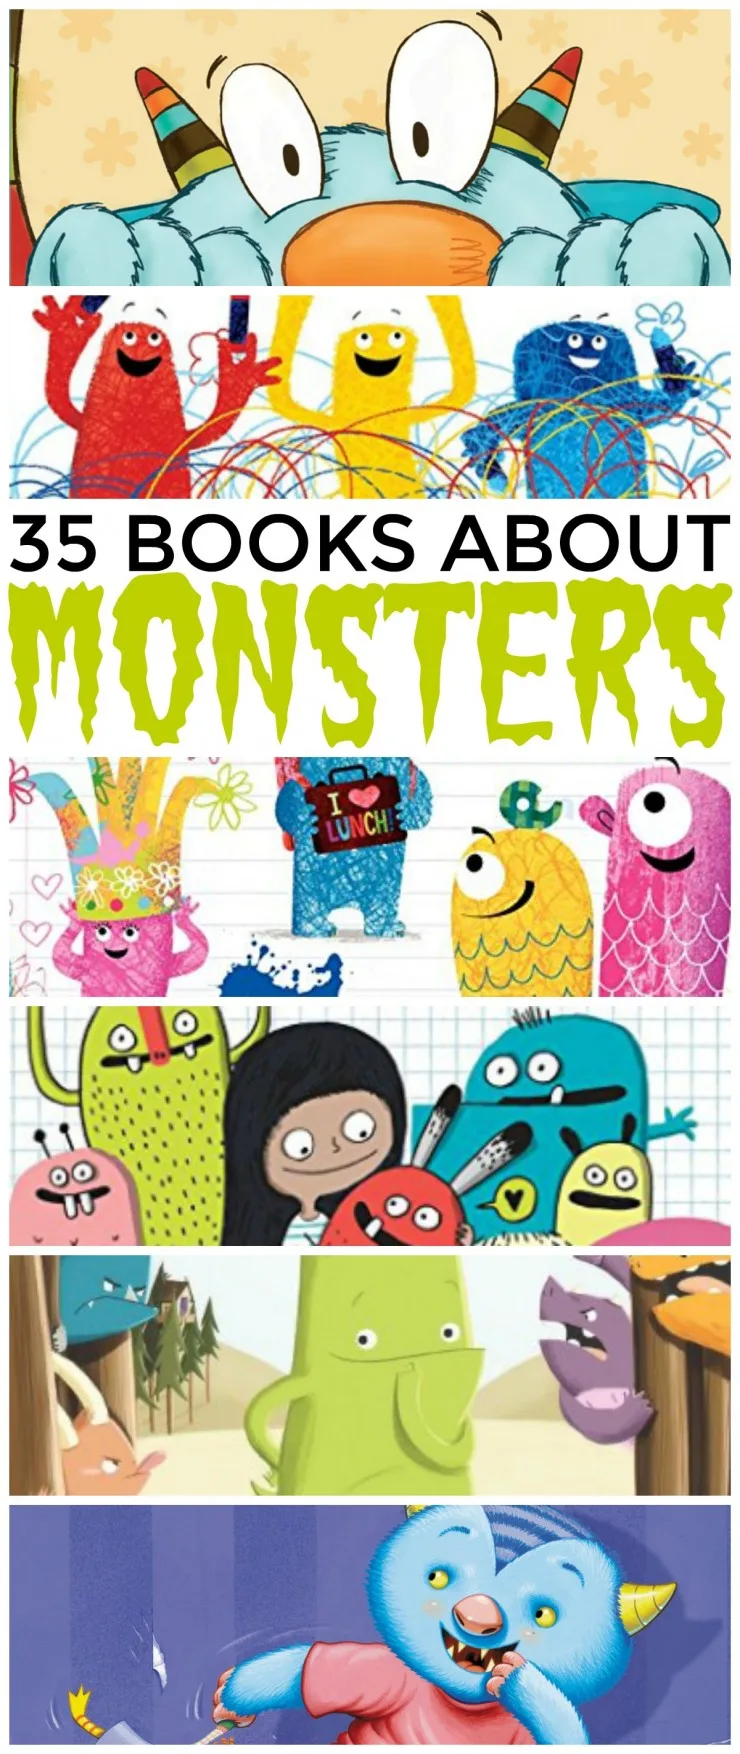 35 books about monsters for kid aged 3-6. Make Monsters fun, not scary, with these great monster books!